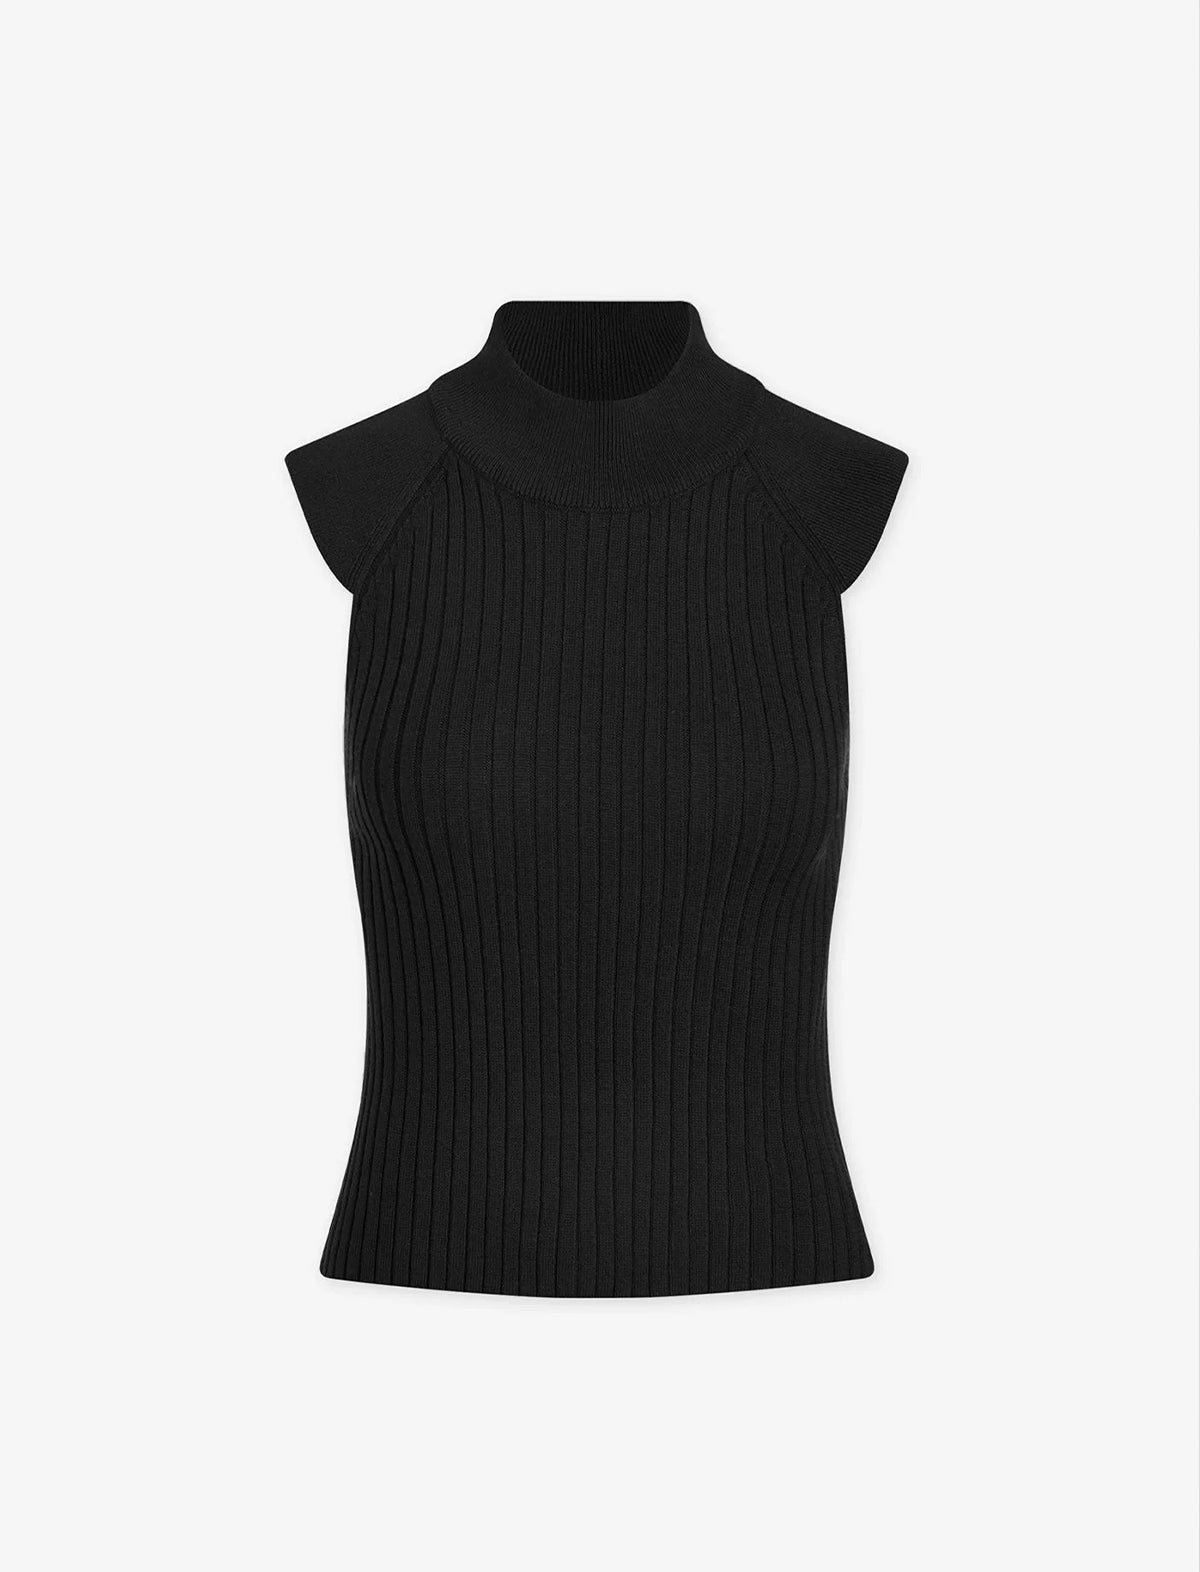 VARLEY Fowler Fitted Knit Tank In Black